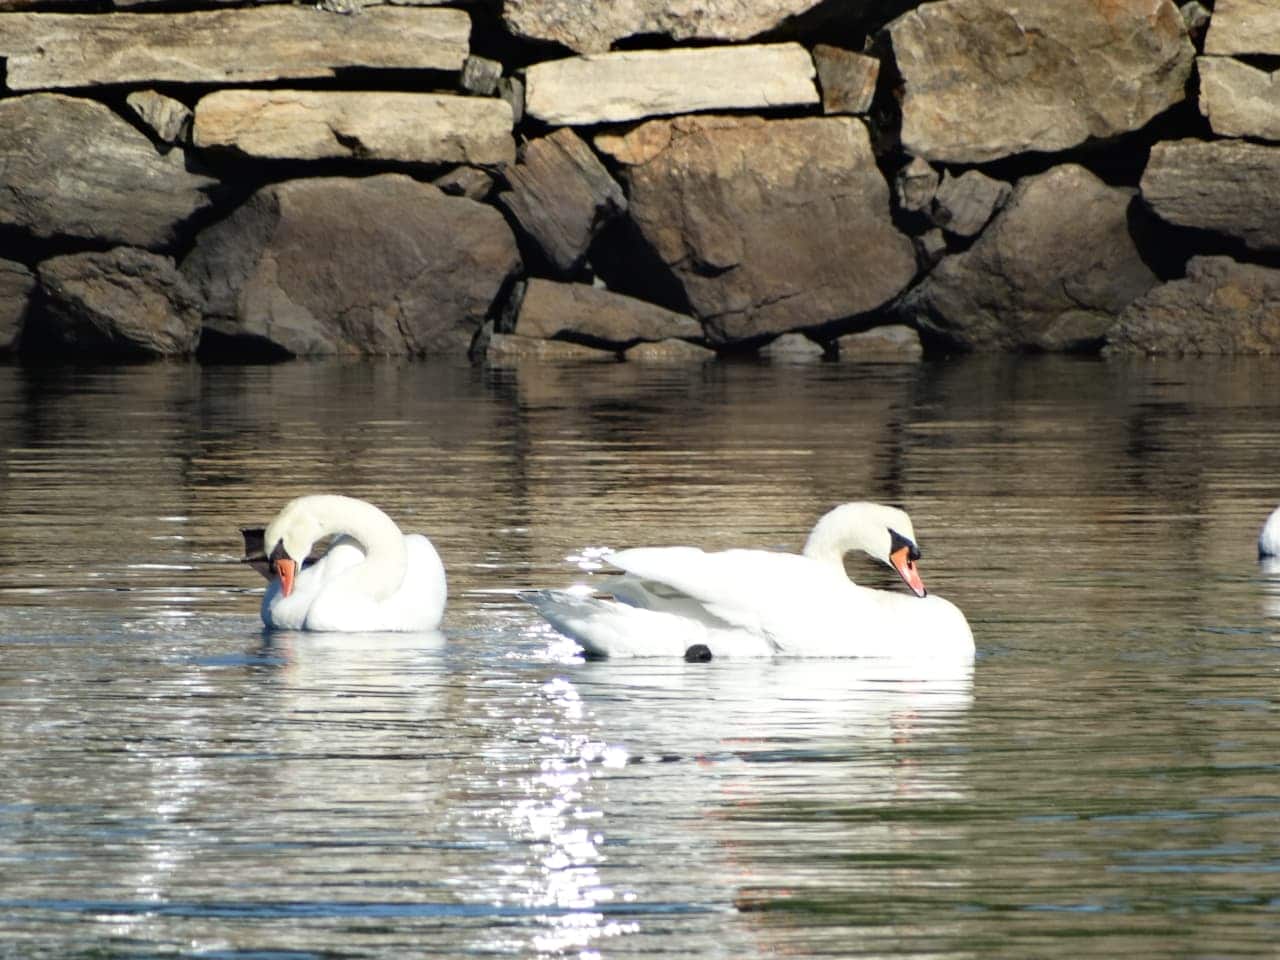 Two Mute Swans swimming in Long Island Sound.